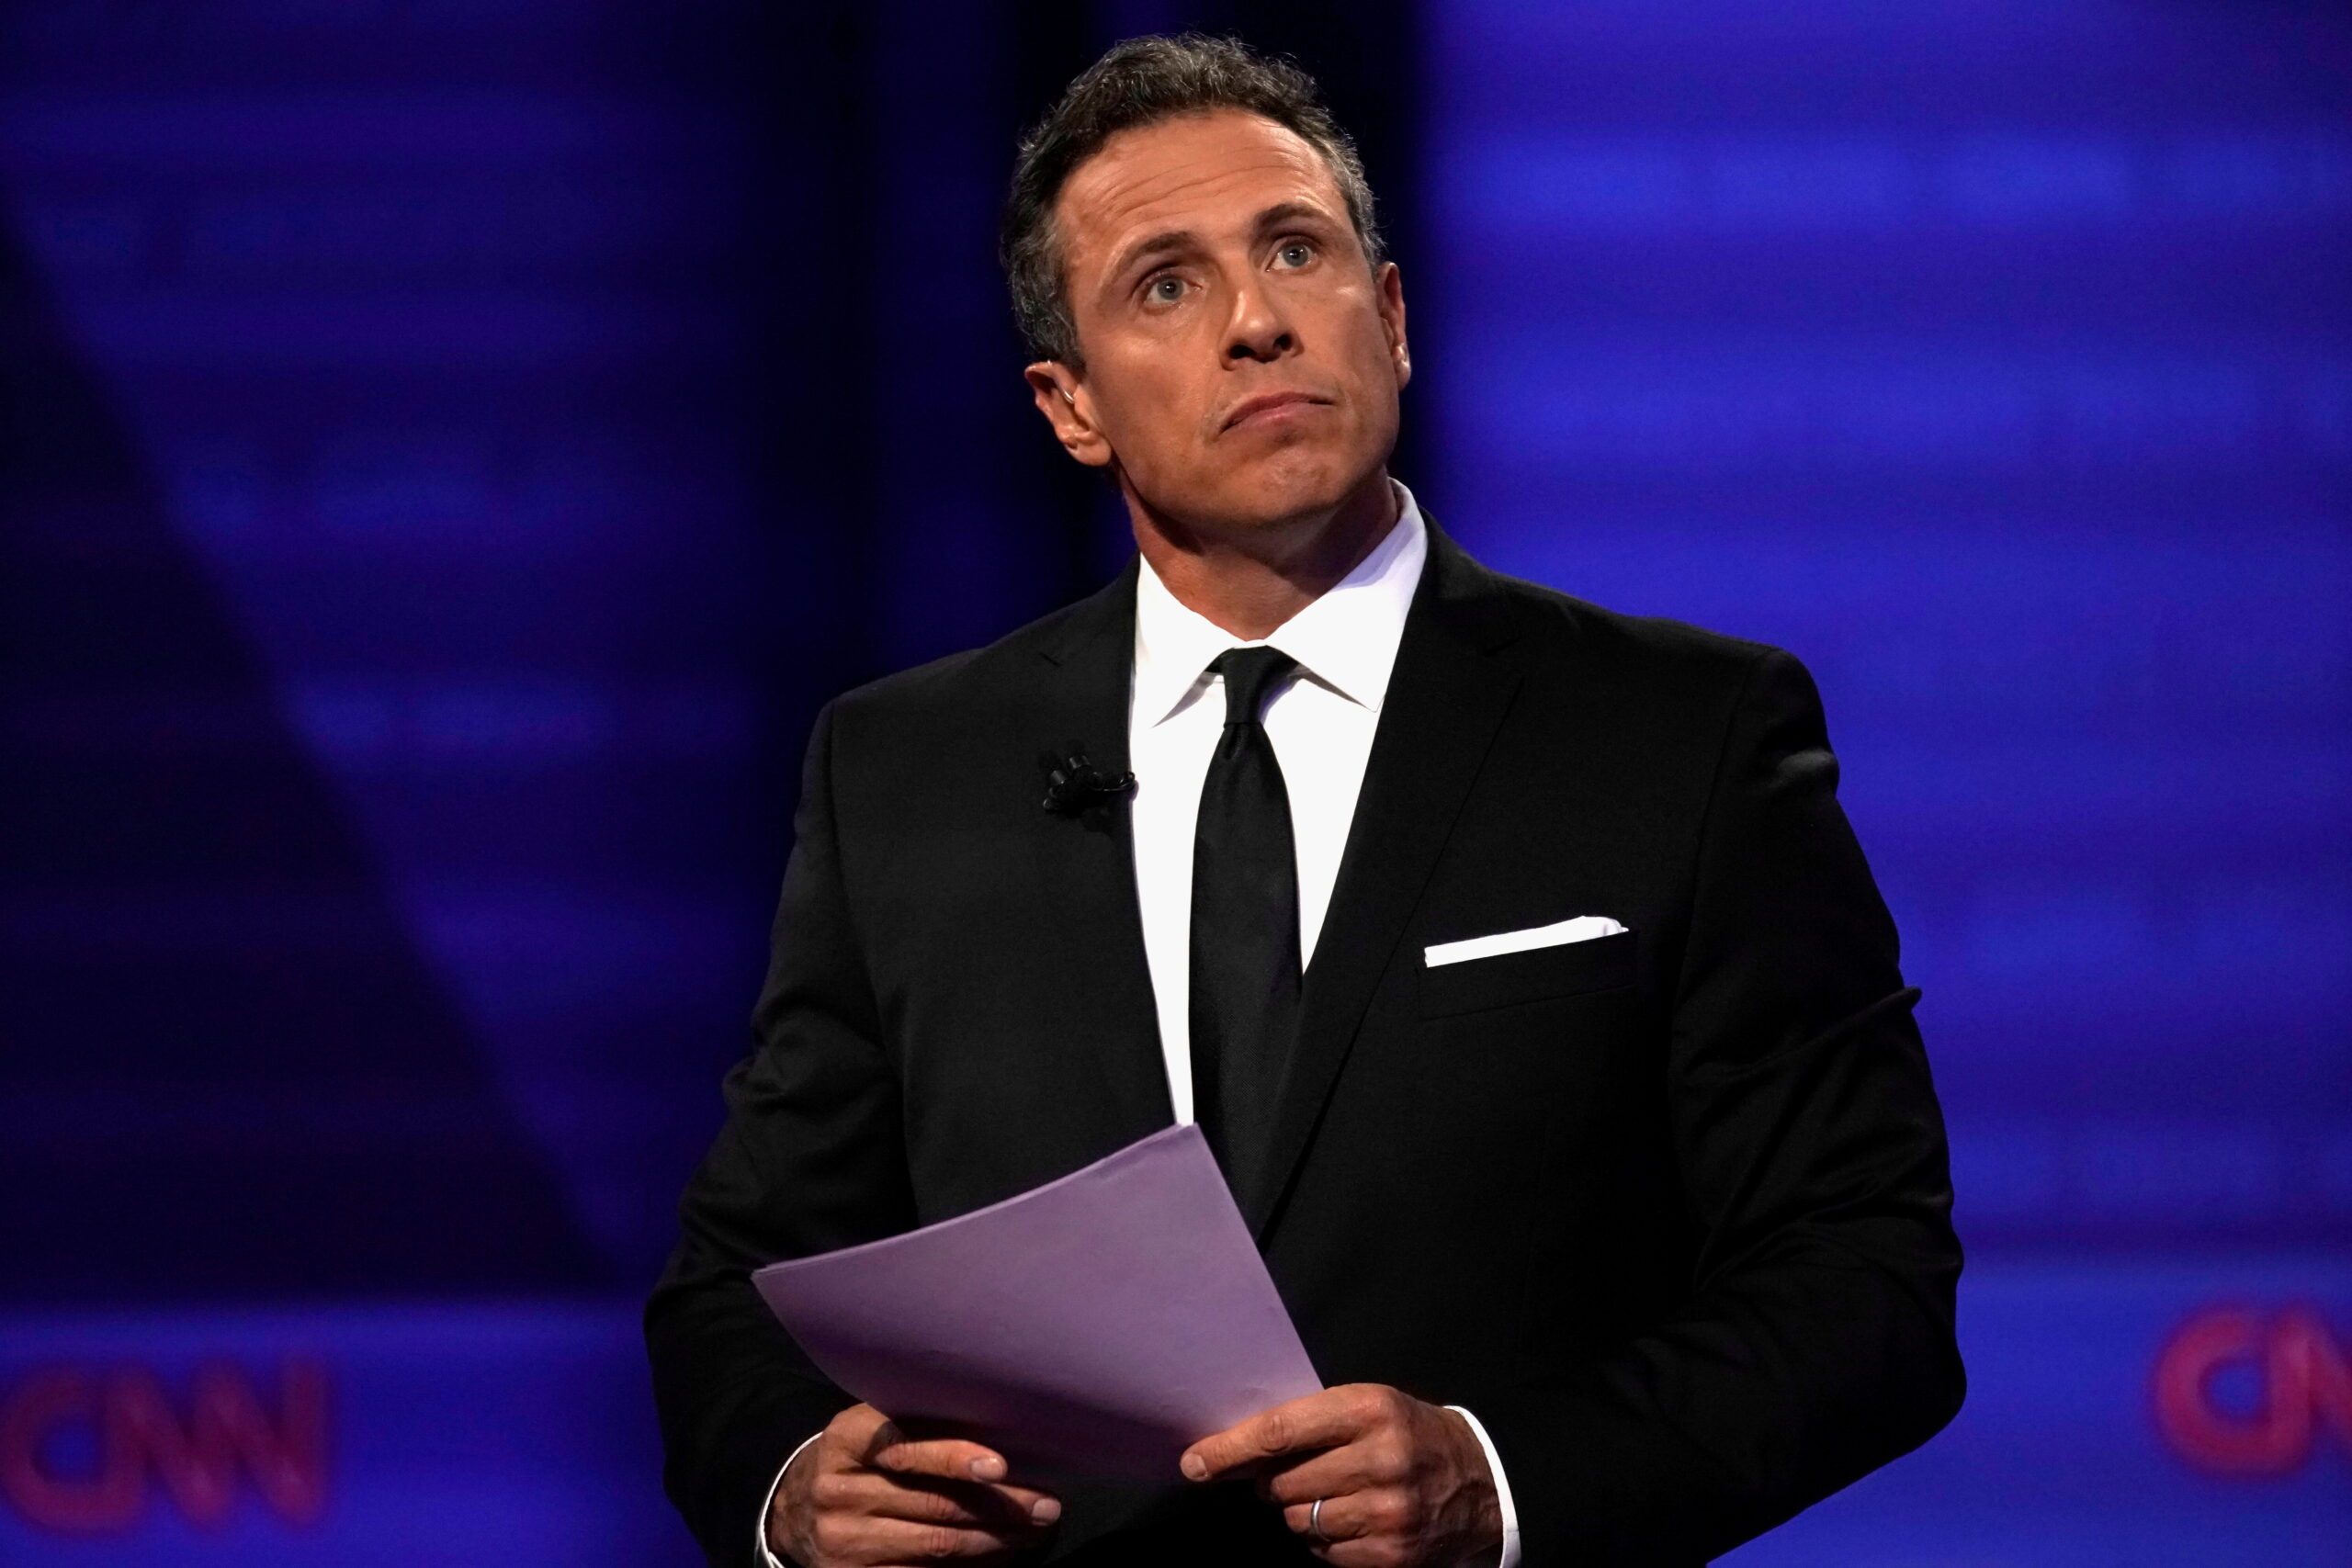 CNN fires anchor Chris Cuomo over role in brother ex-governor’s sex scandal